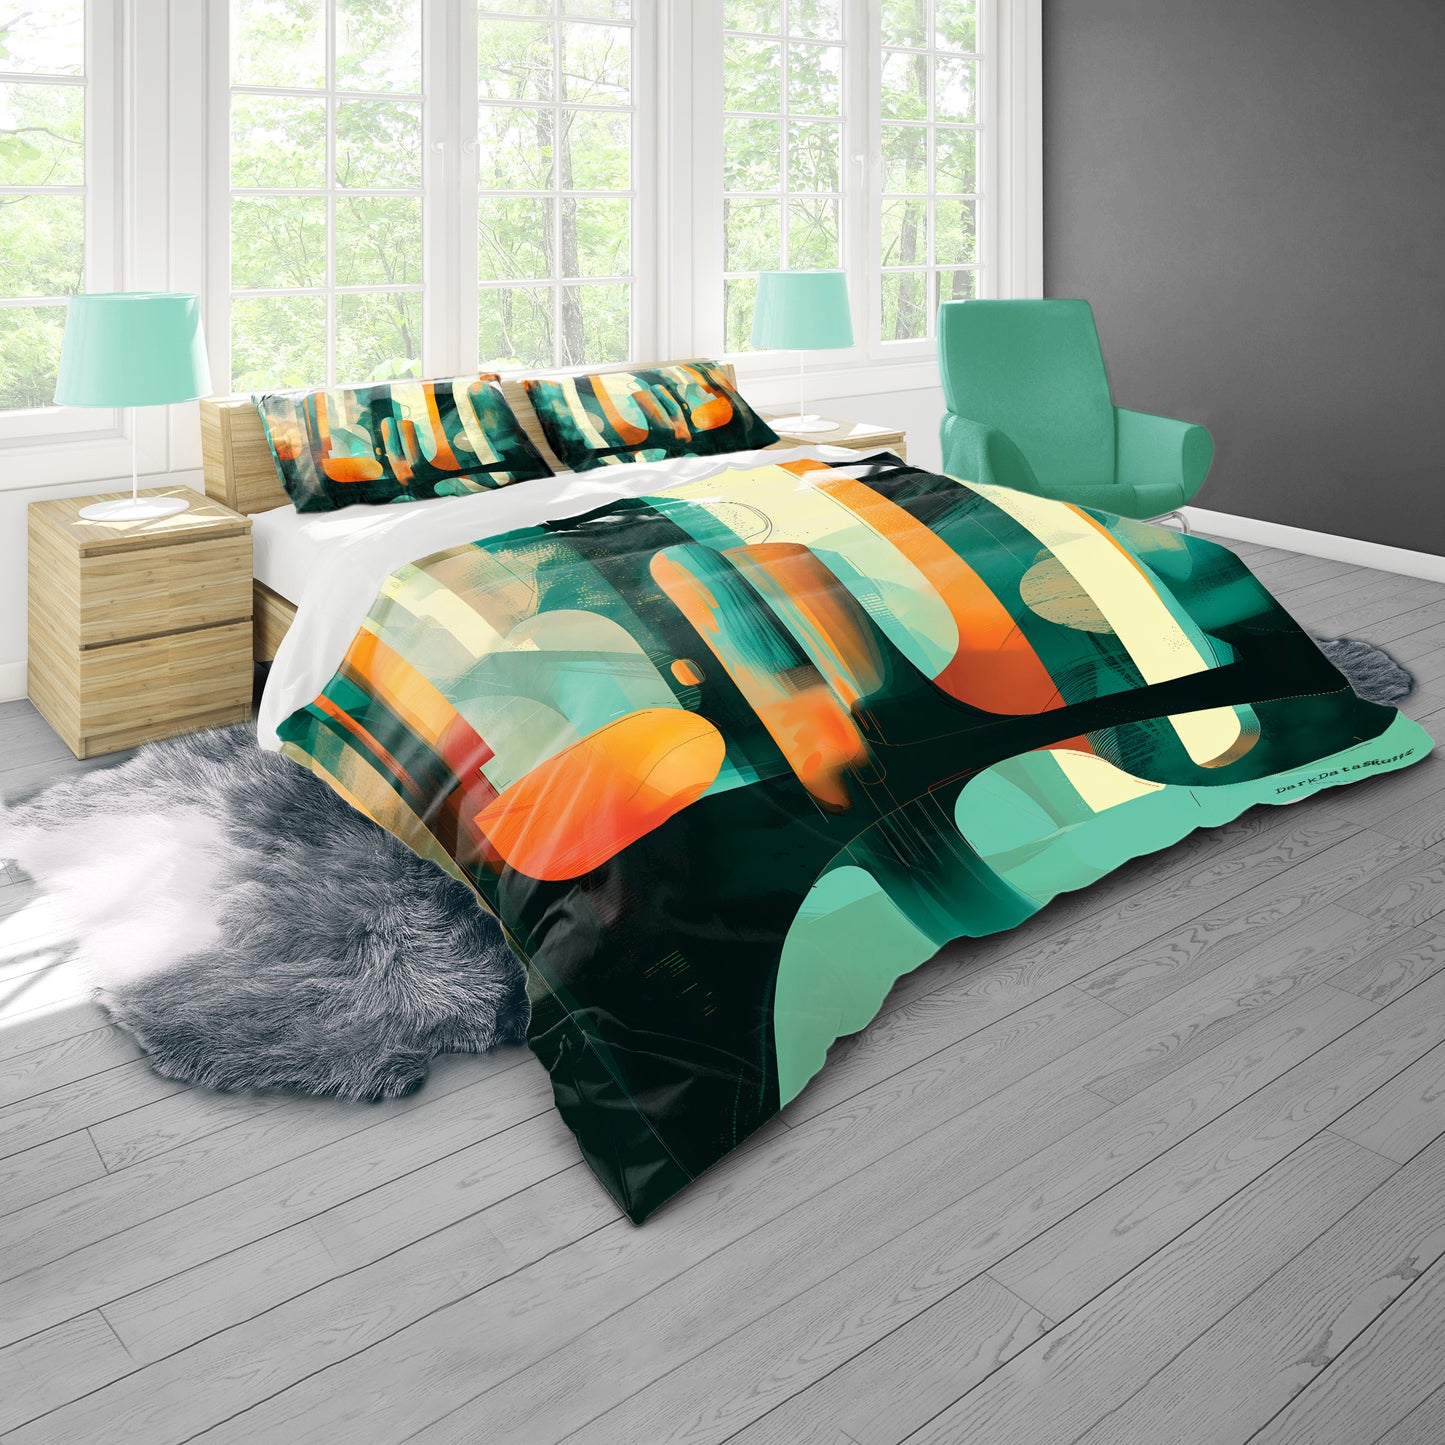 Abstract Teal and Orange by Wikus Schalkwyk Duvet Cover Set